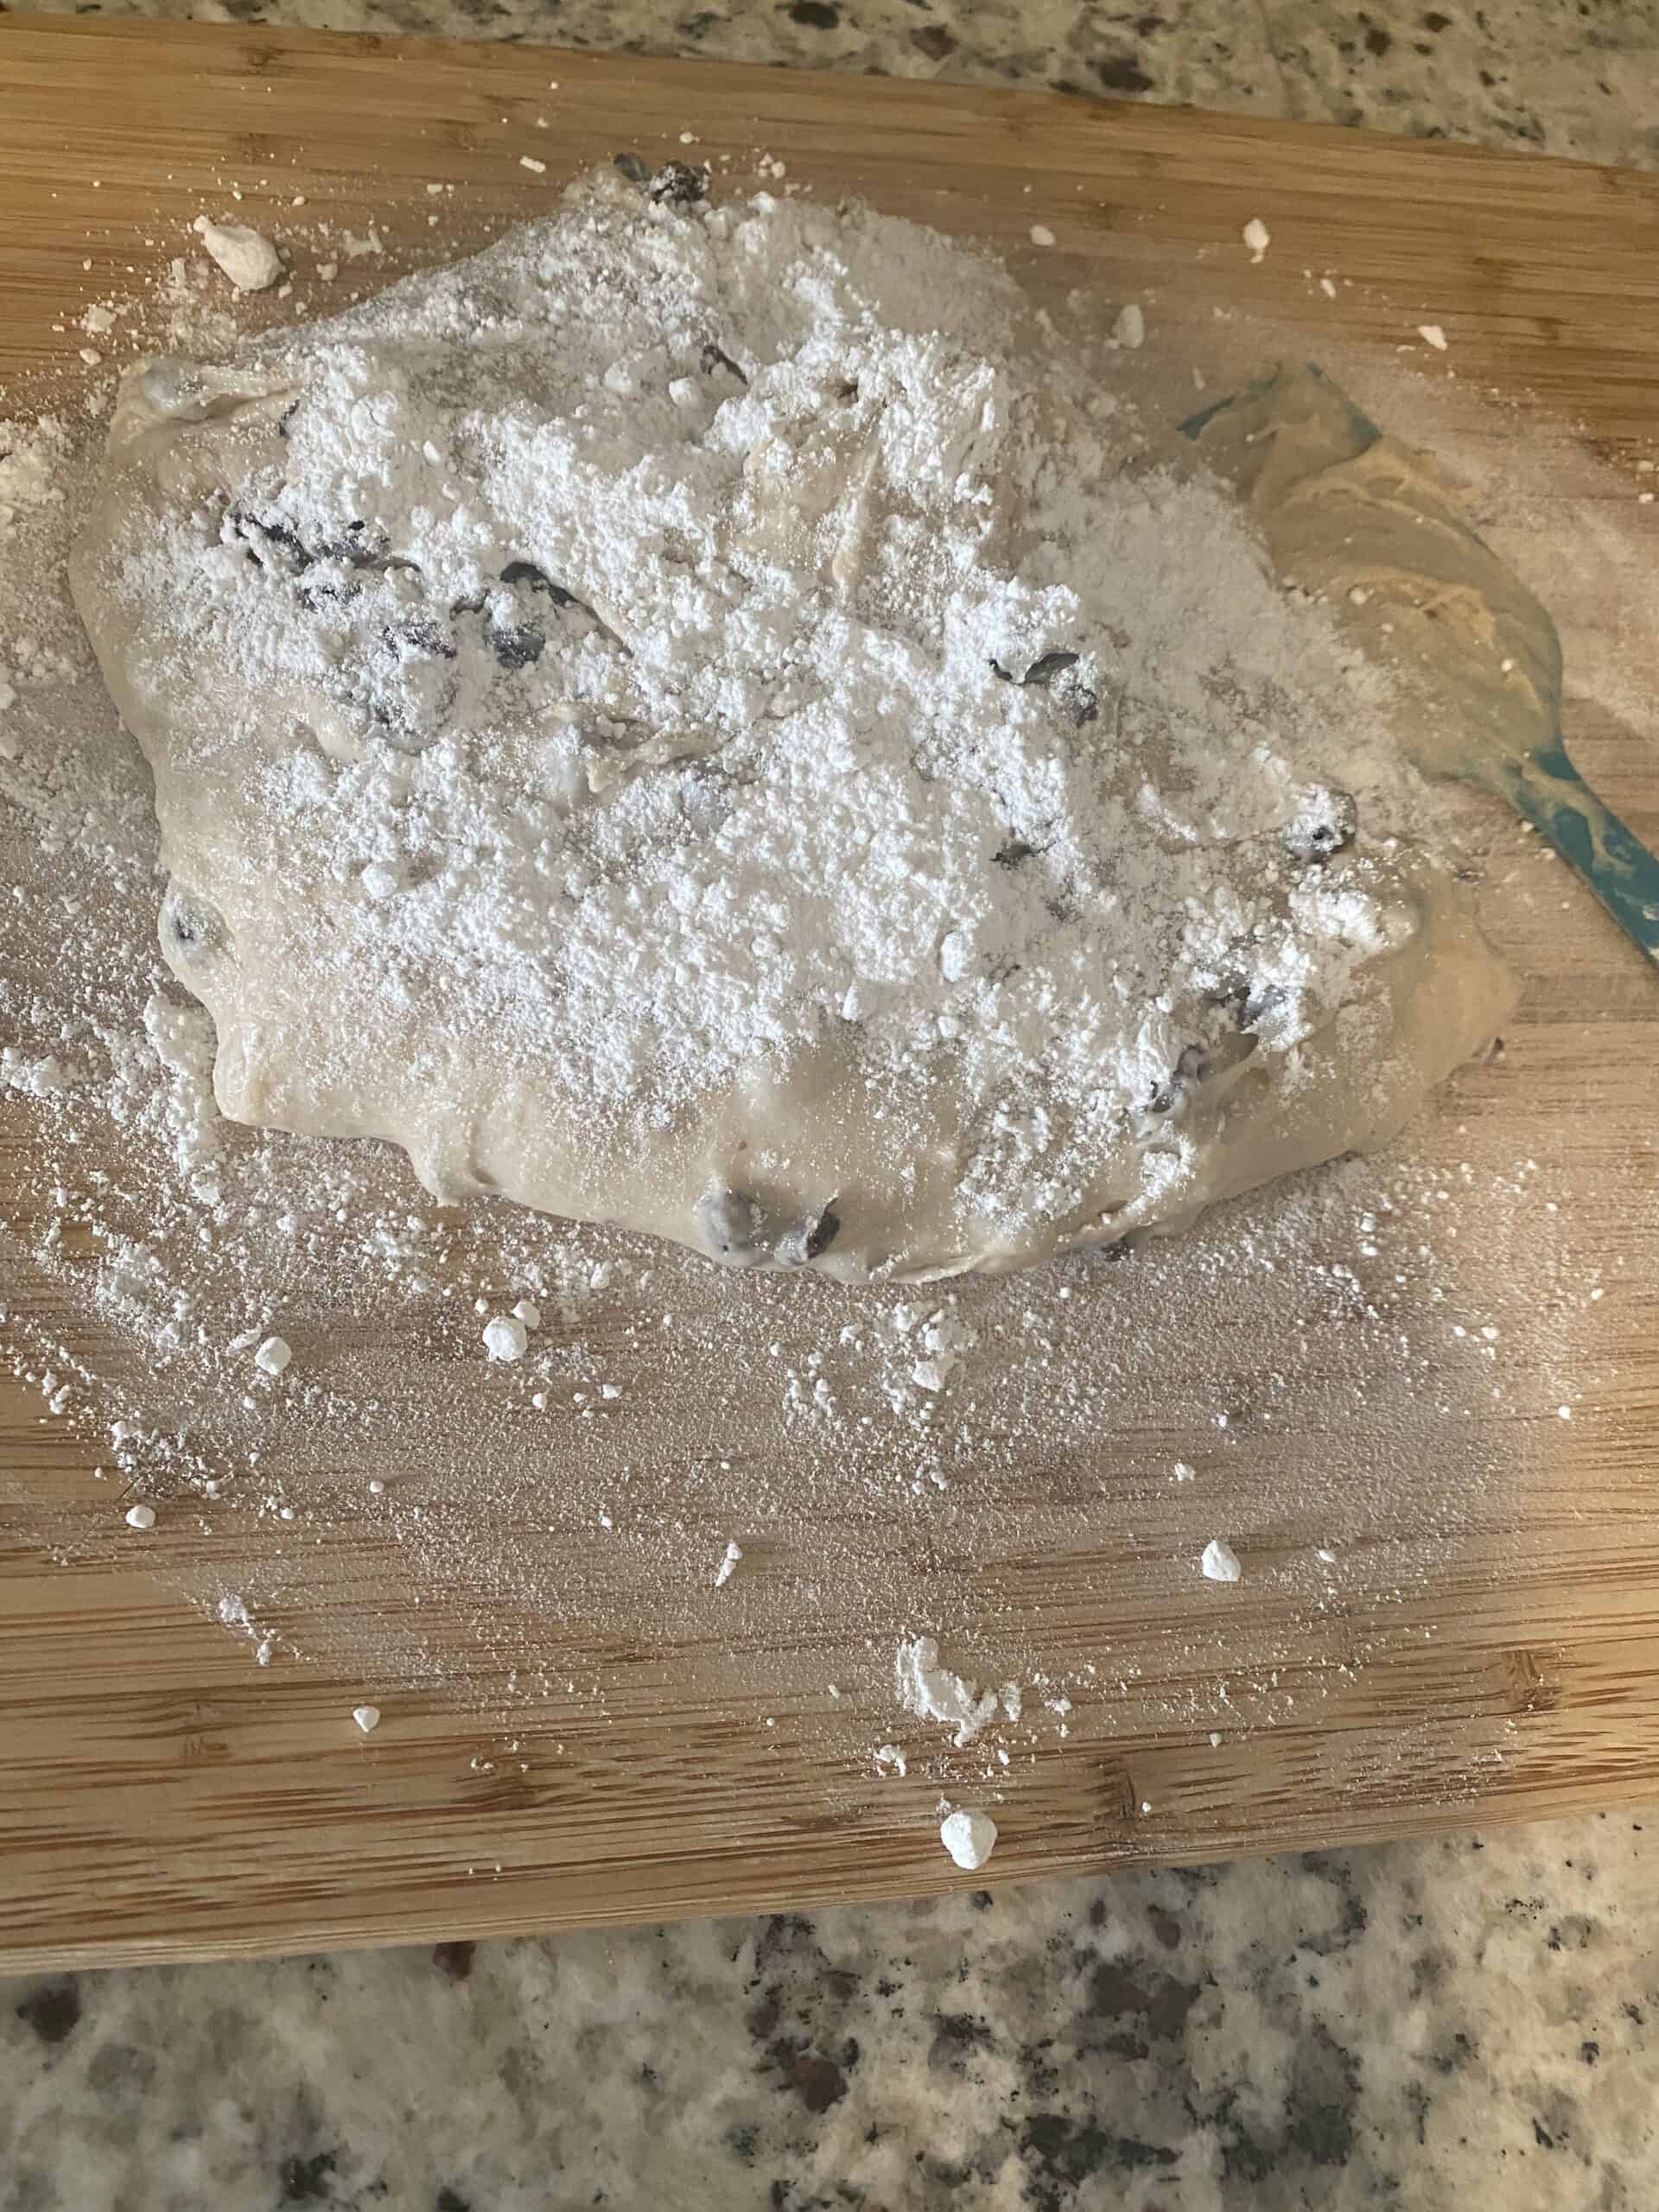 Process shot - kneaded dough, topped with flour sitting on a wooden cutting board. 